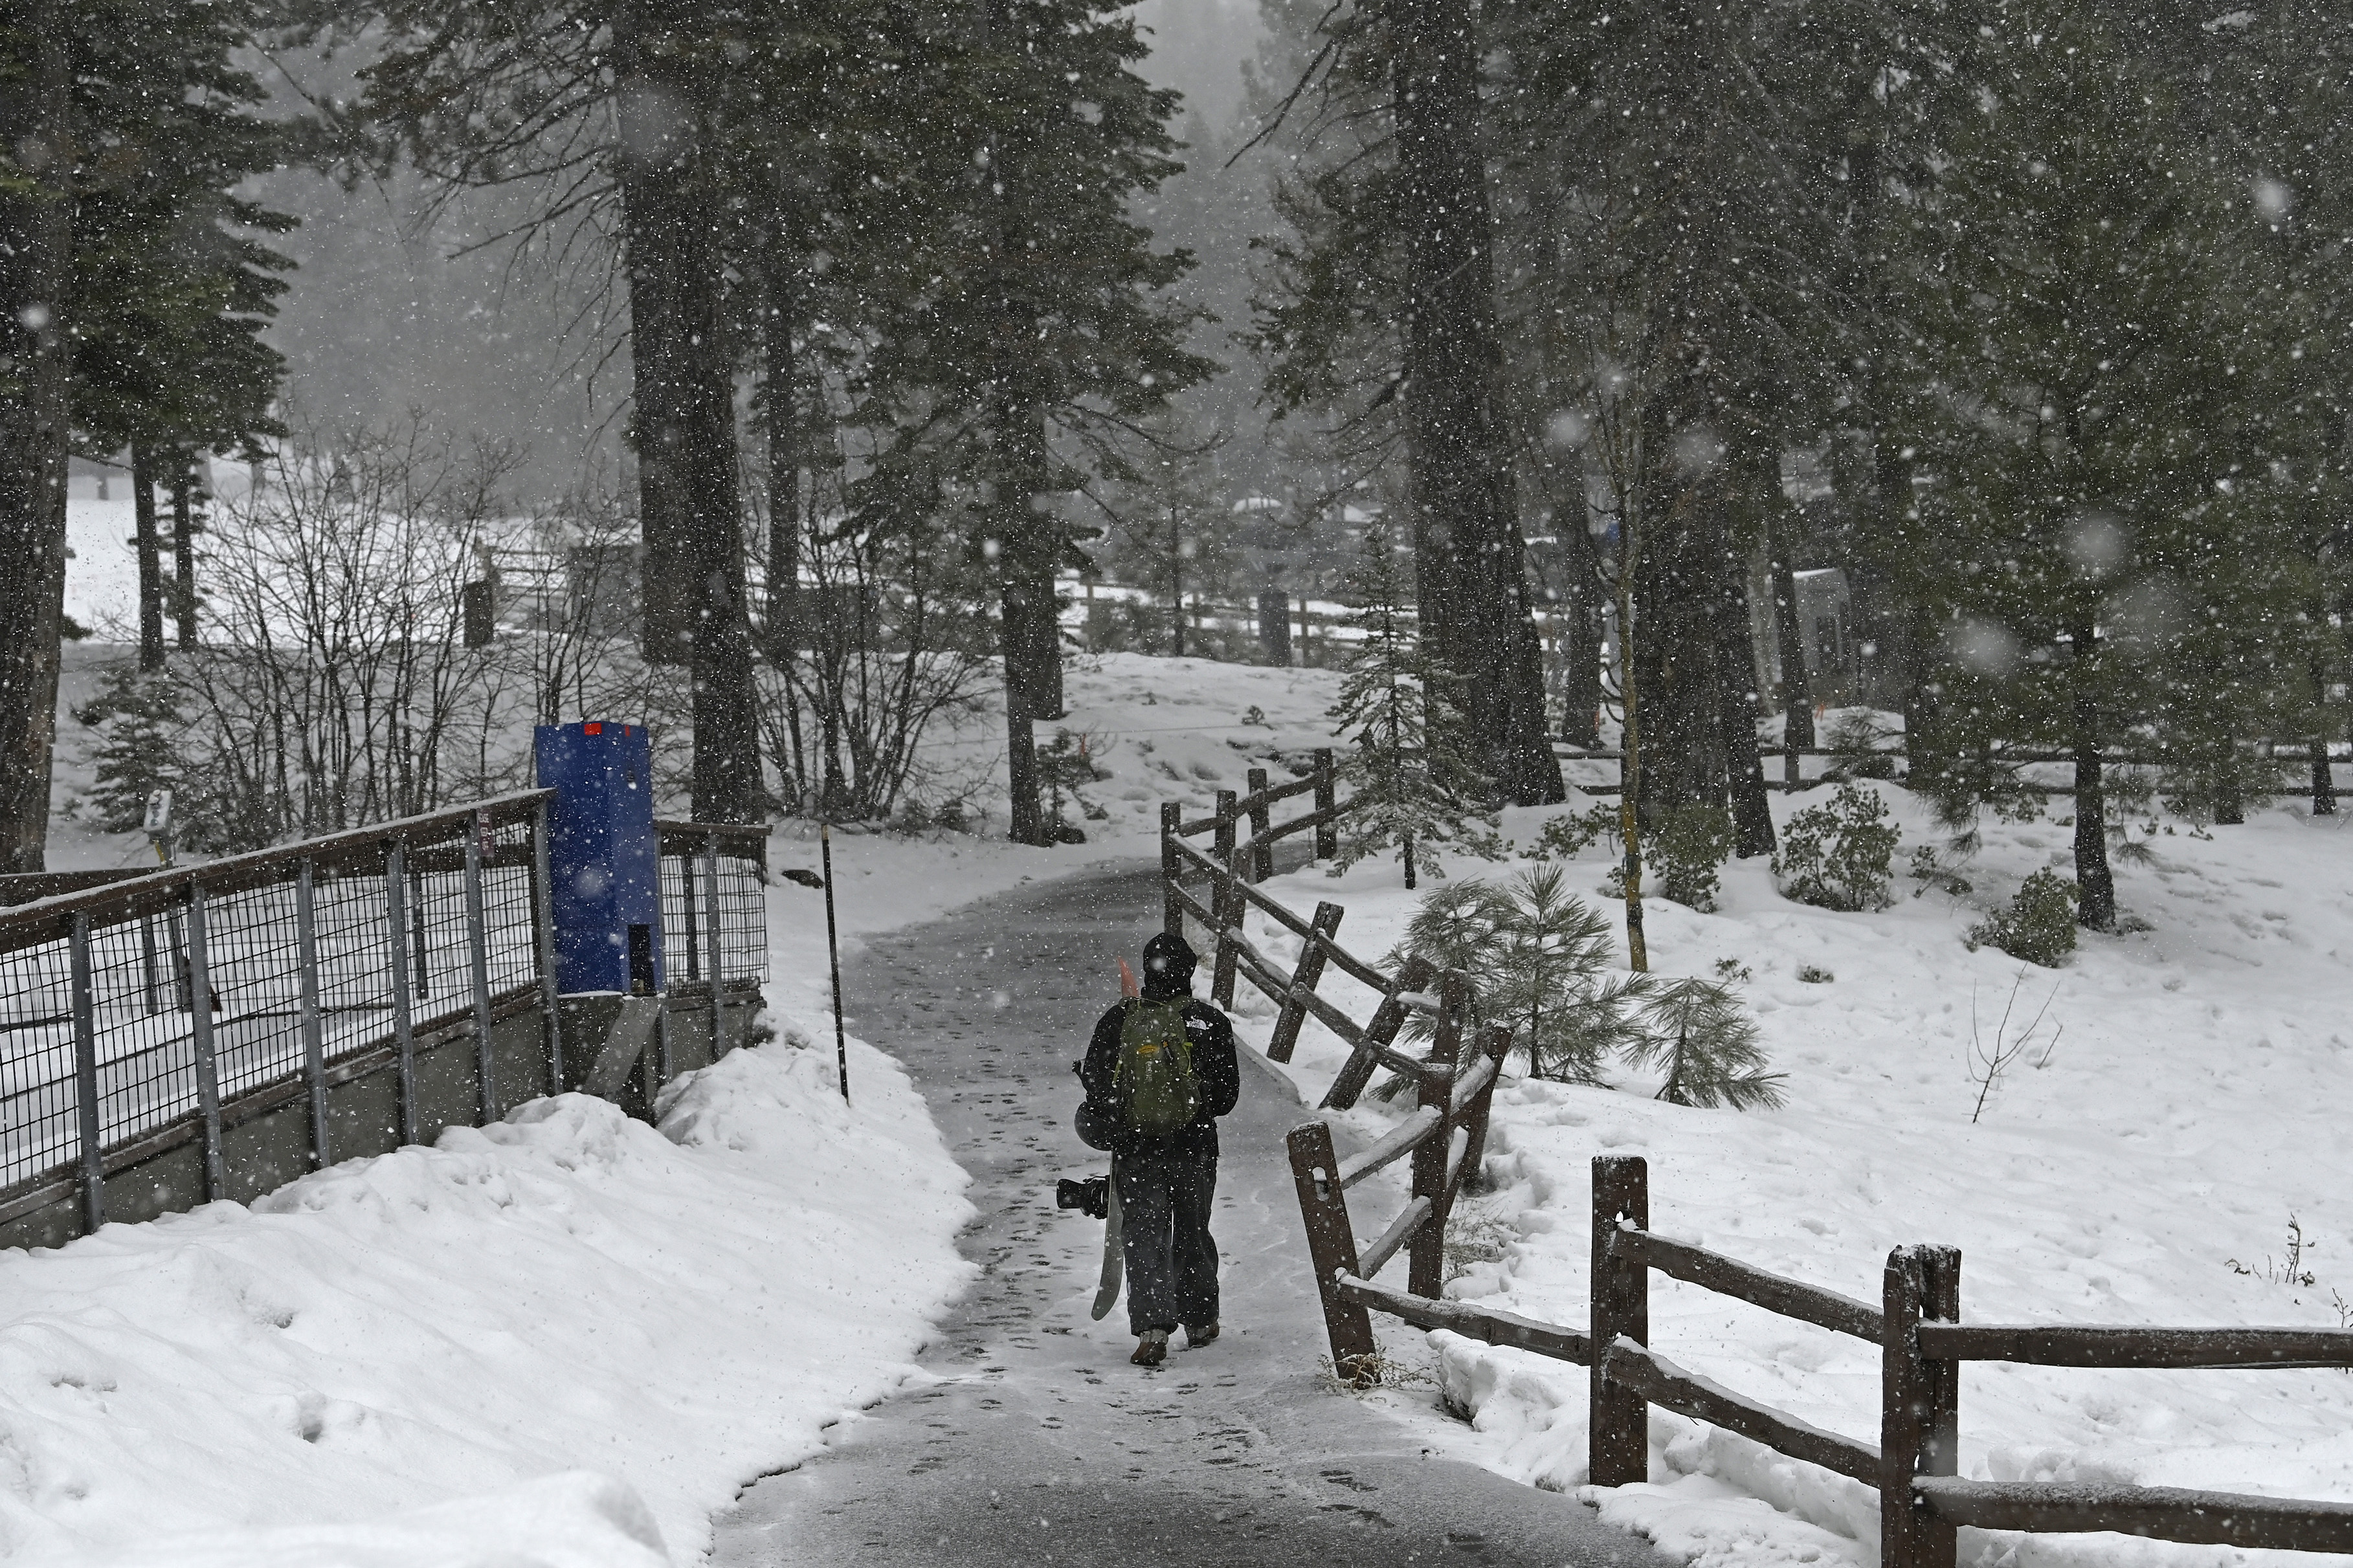 A person carrying a snowboard walks down a path as snow falls